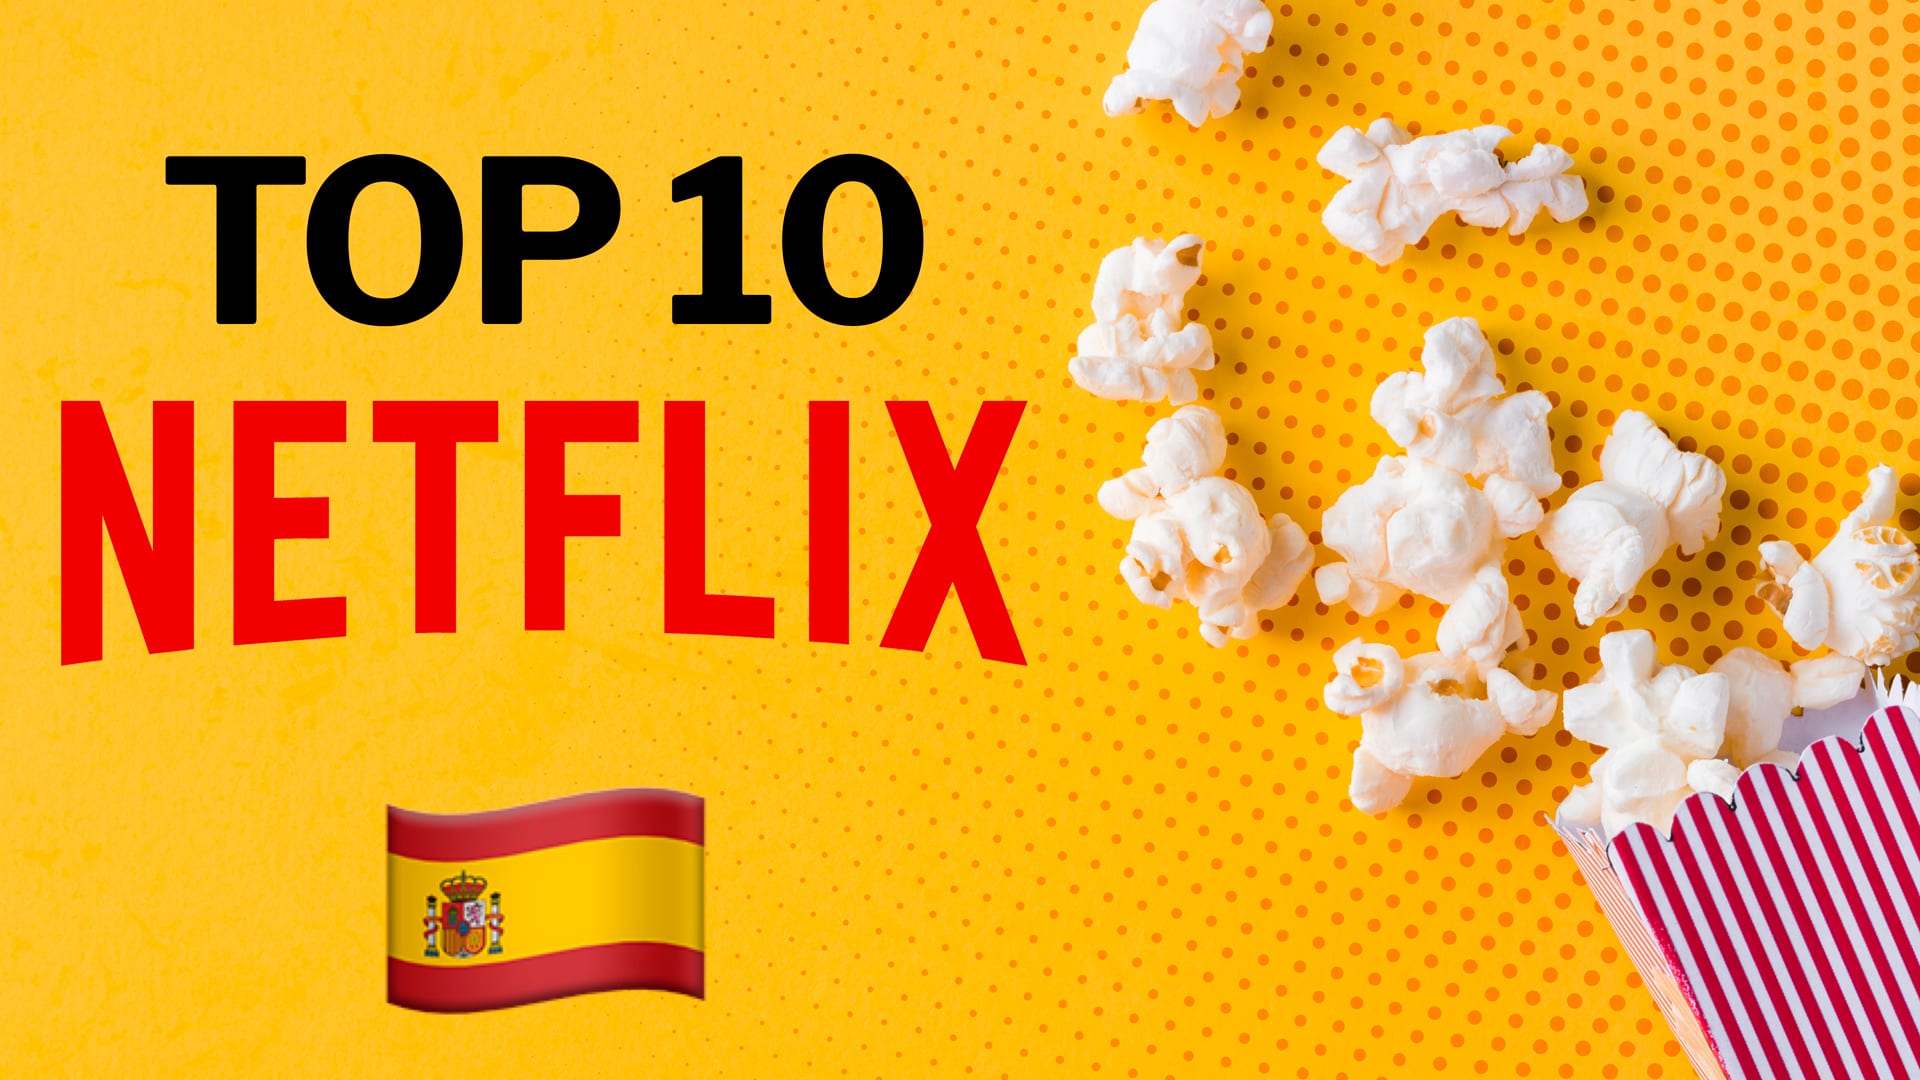 Netflix ranking in Spain: these are the favorite movies of the moment